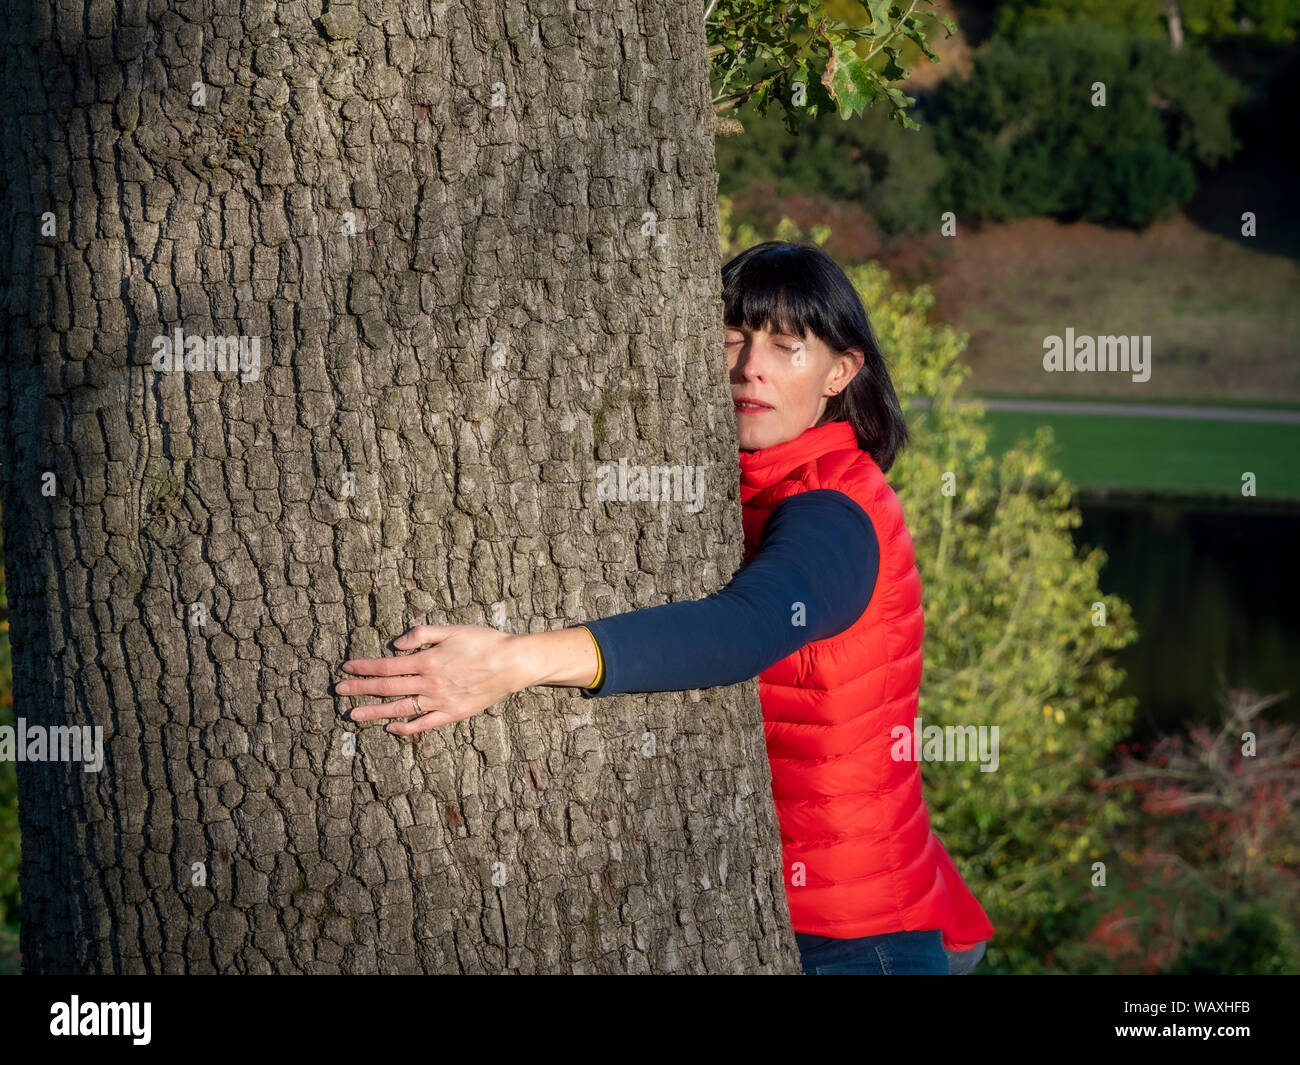 Woman in red gilet hugging large tree trunk Stock Photo